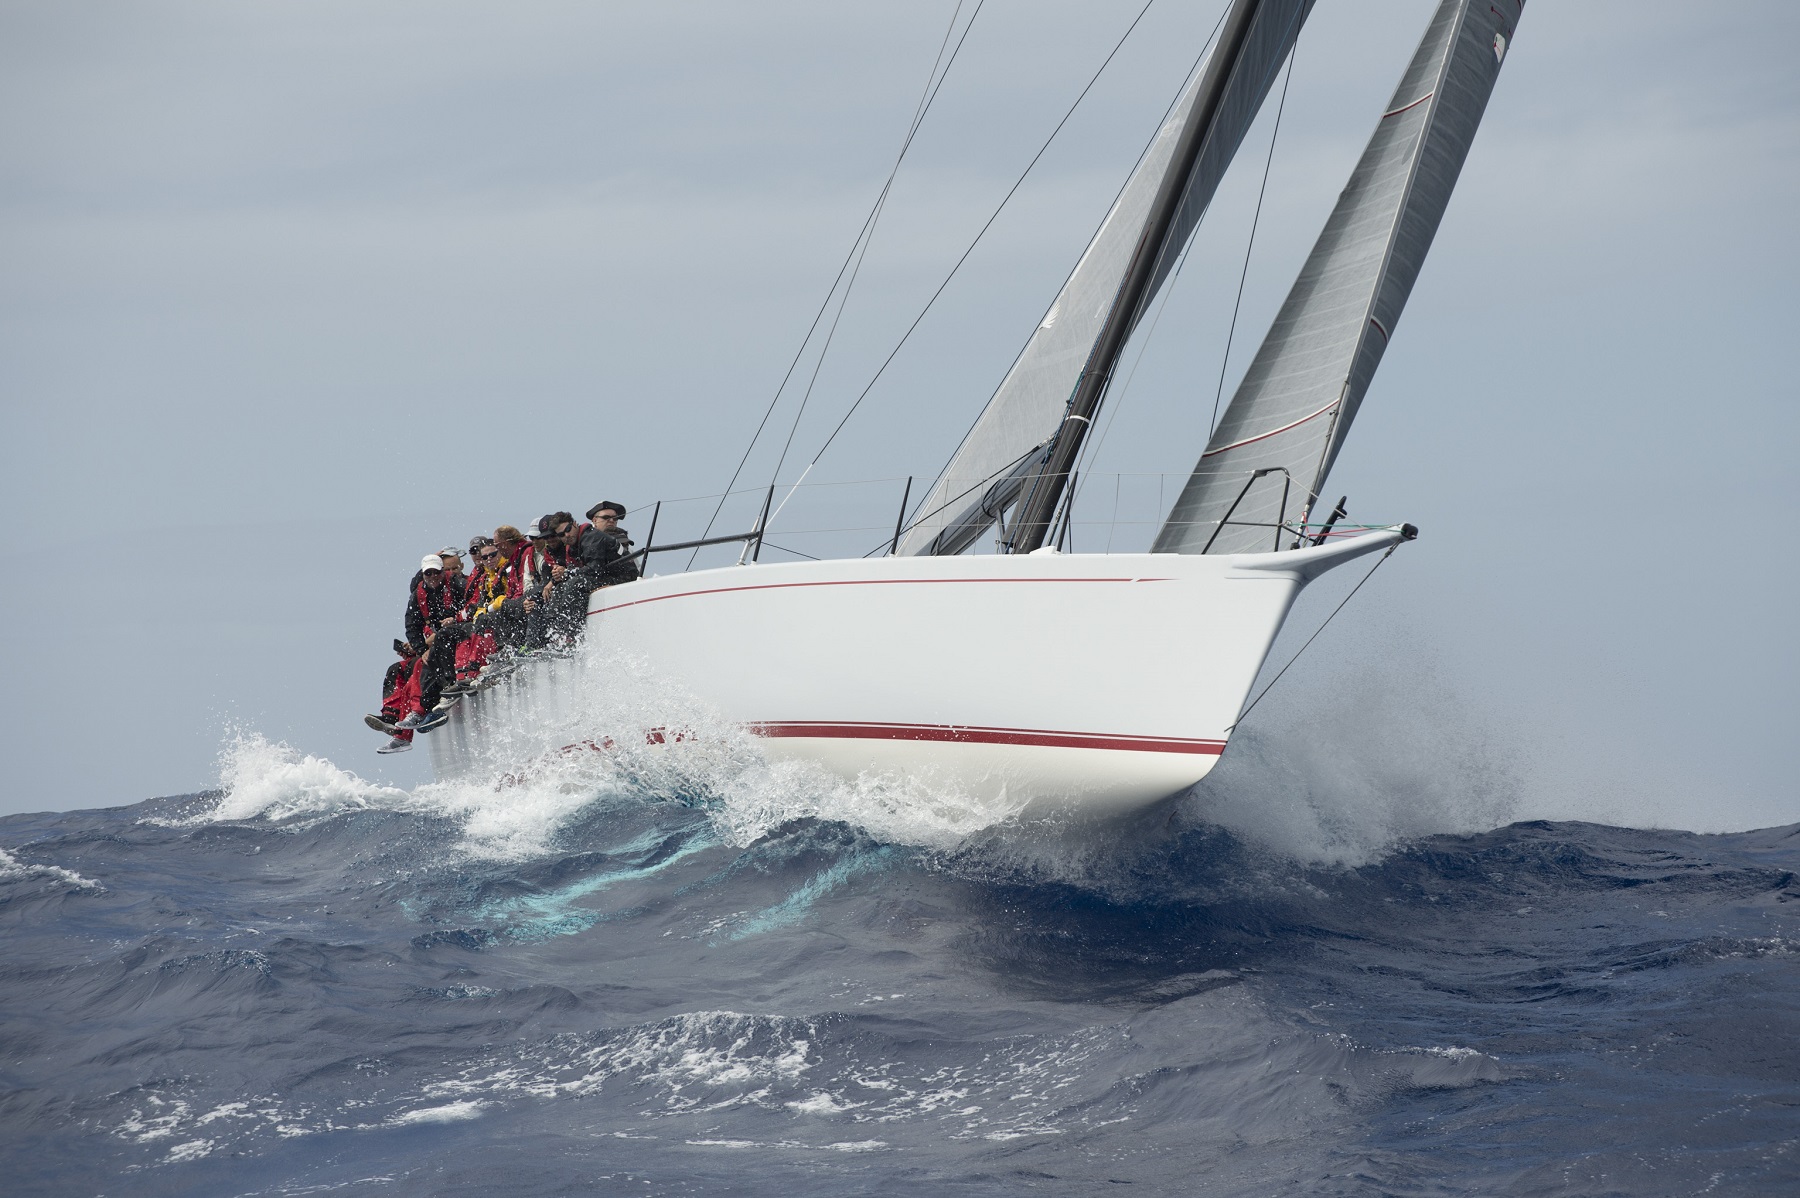 Racing in IRC Zero - Ron Hanley’s Cookson 50 Privateer (USA) was overall winner in 2013 and second overall in 2018 © Tim Wright/Photoaction.com